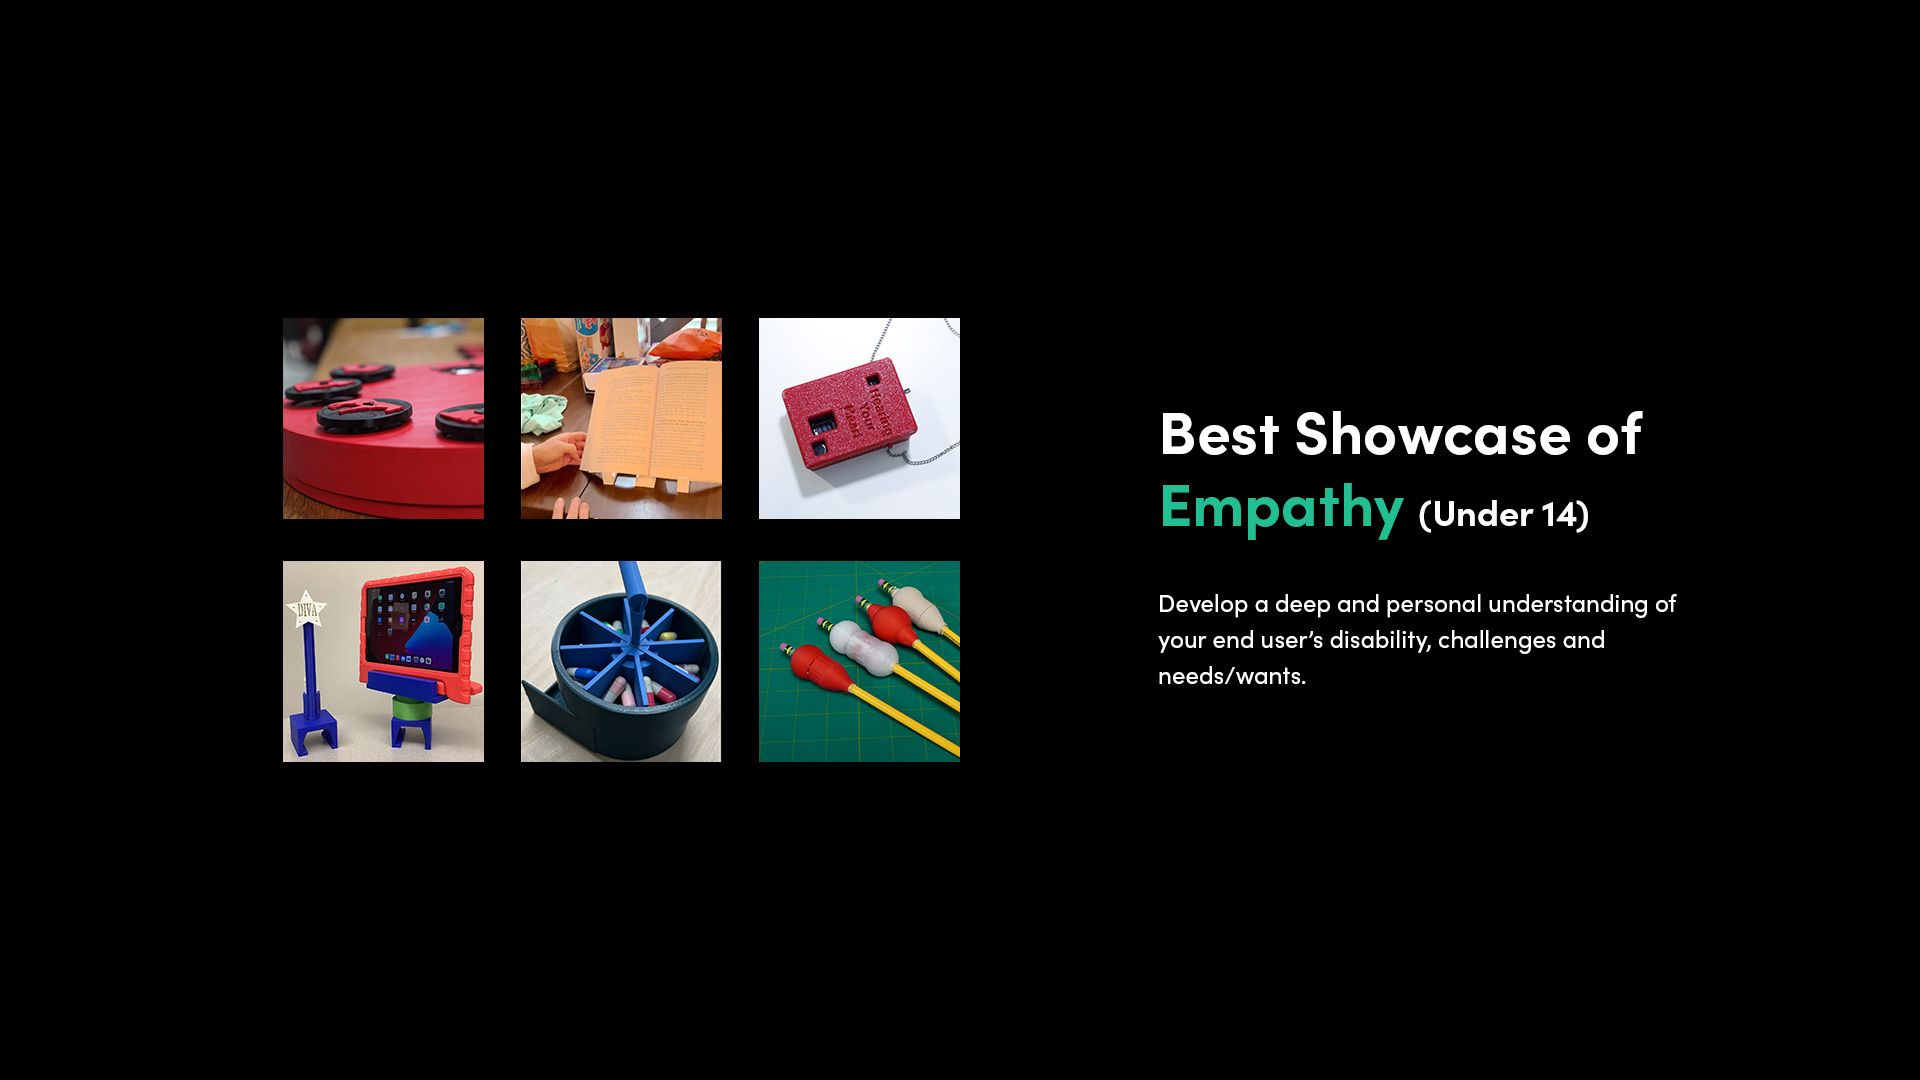 A selection of 3D printed assistive devices that made the finalist shortlist for the Make:able Challenge, in the category 'Best Showcase of Empathy - Under 14'.